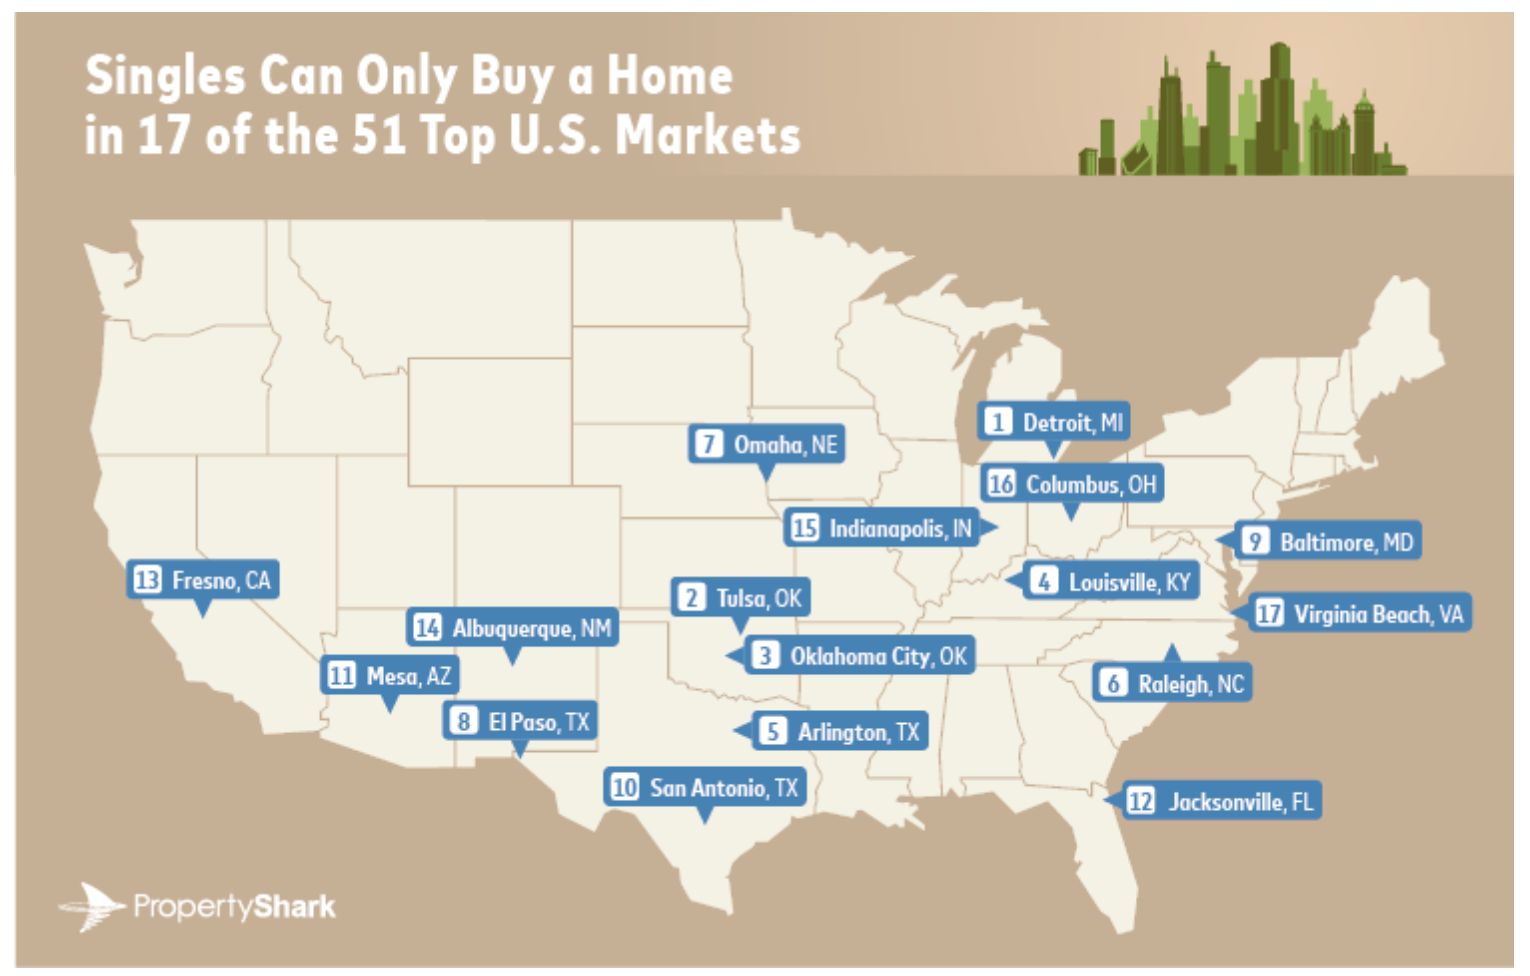 A map of the US showing the markets singles can buy a home.